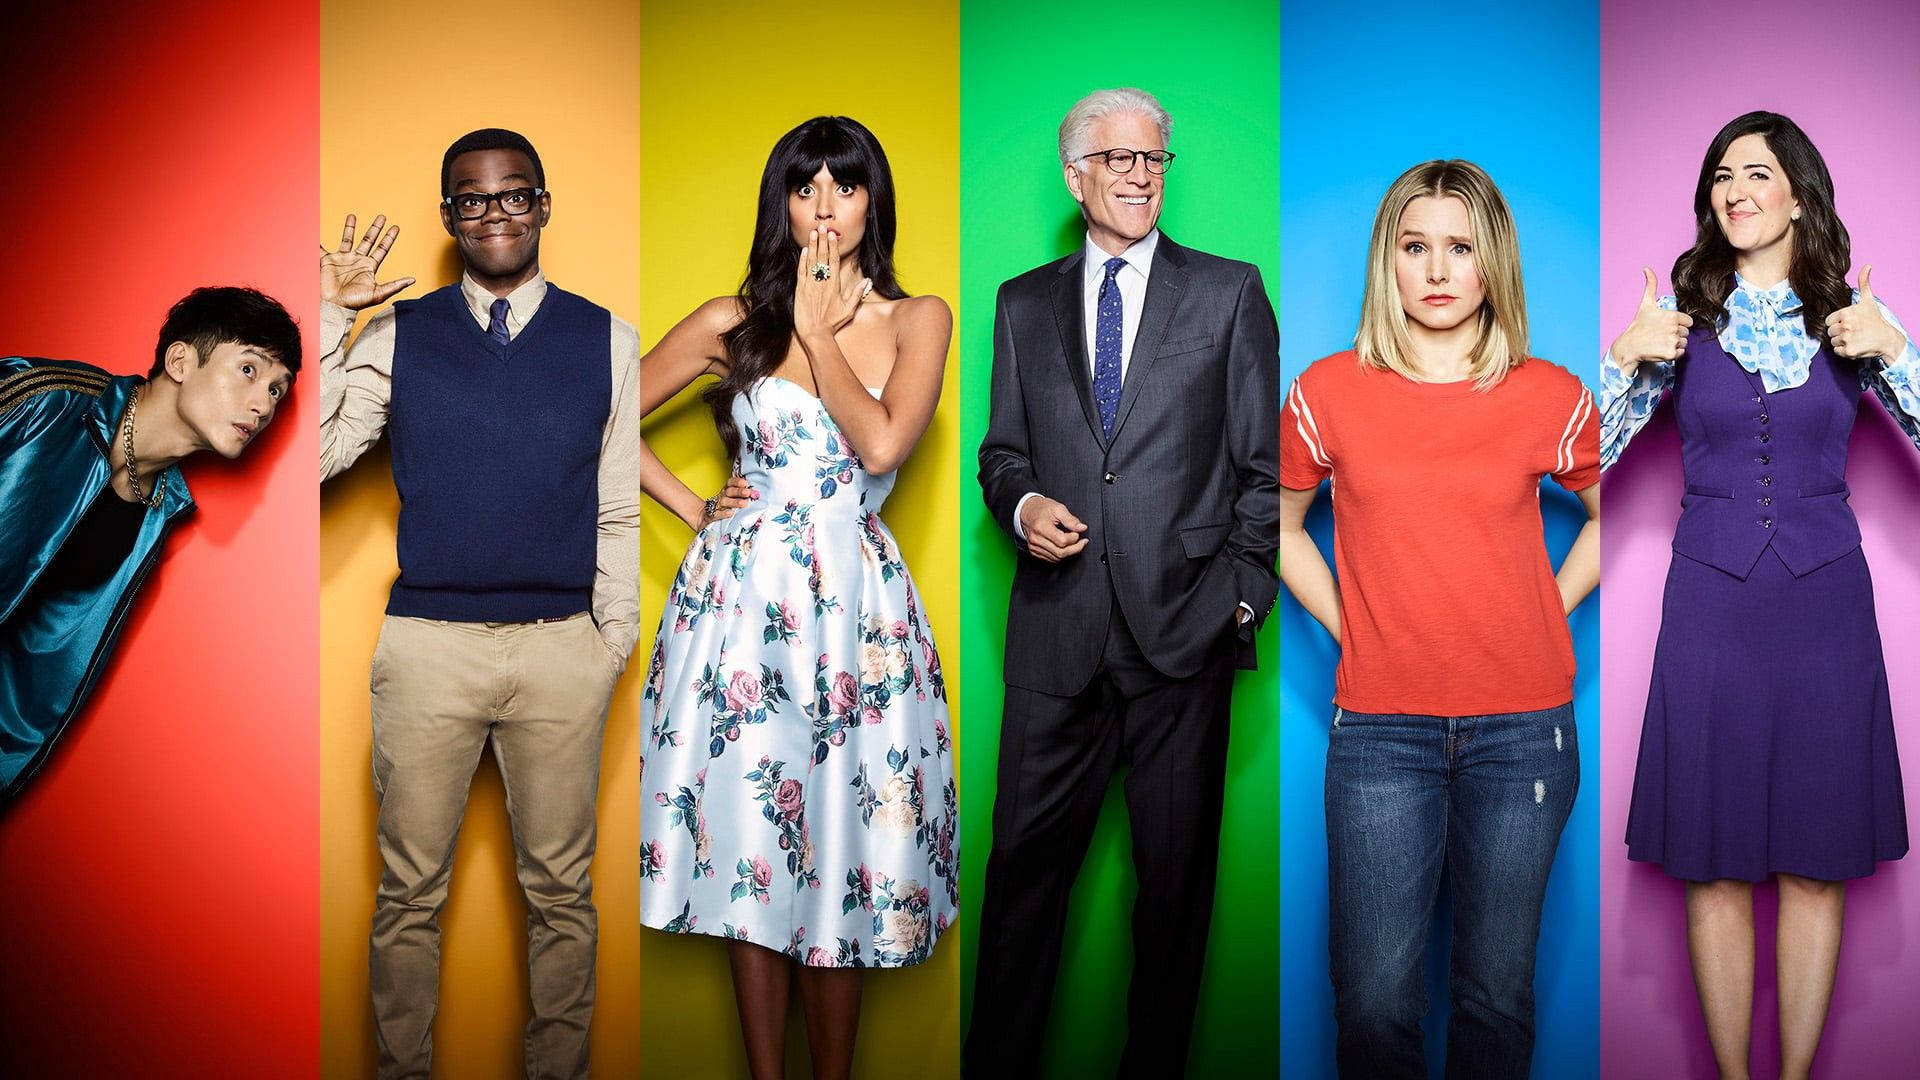 30 The Good Place HD Wallpapers and Backgrounds